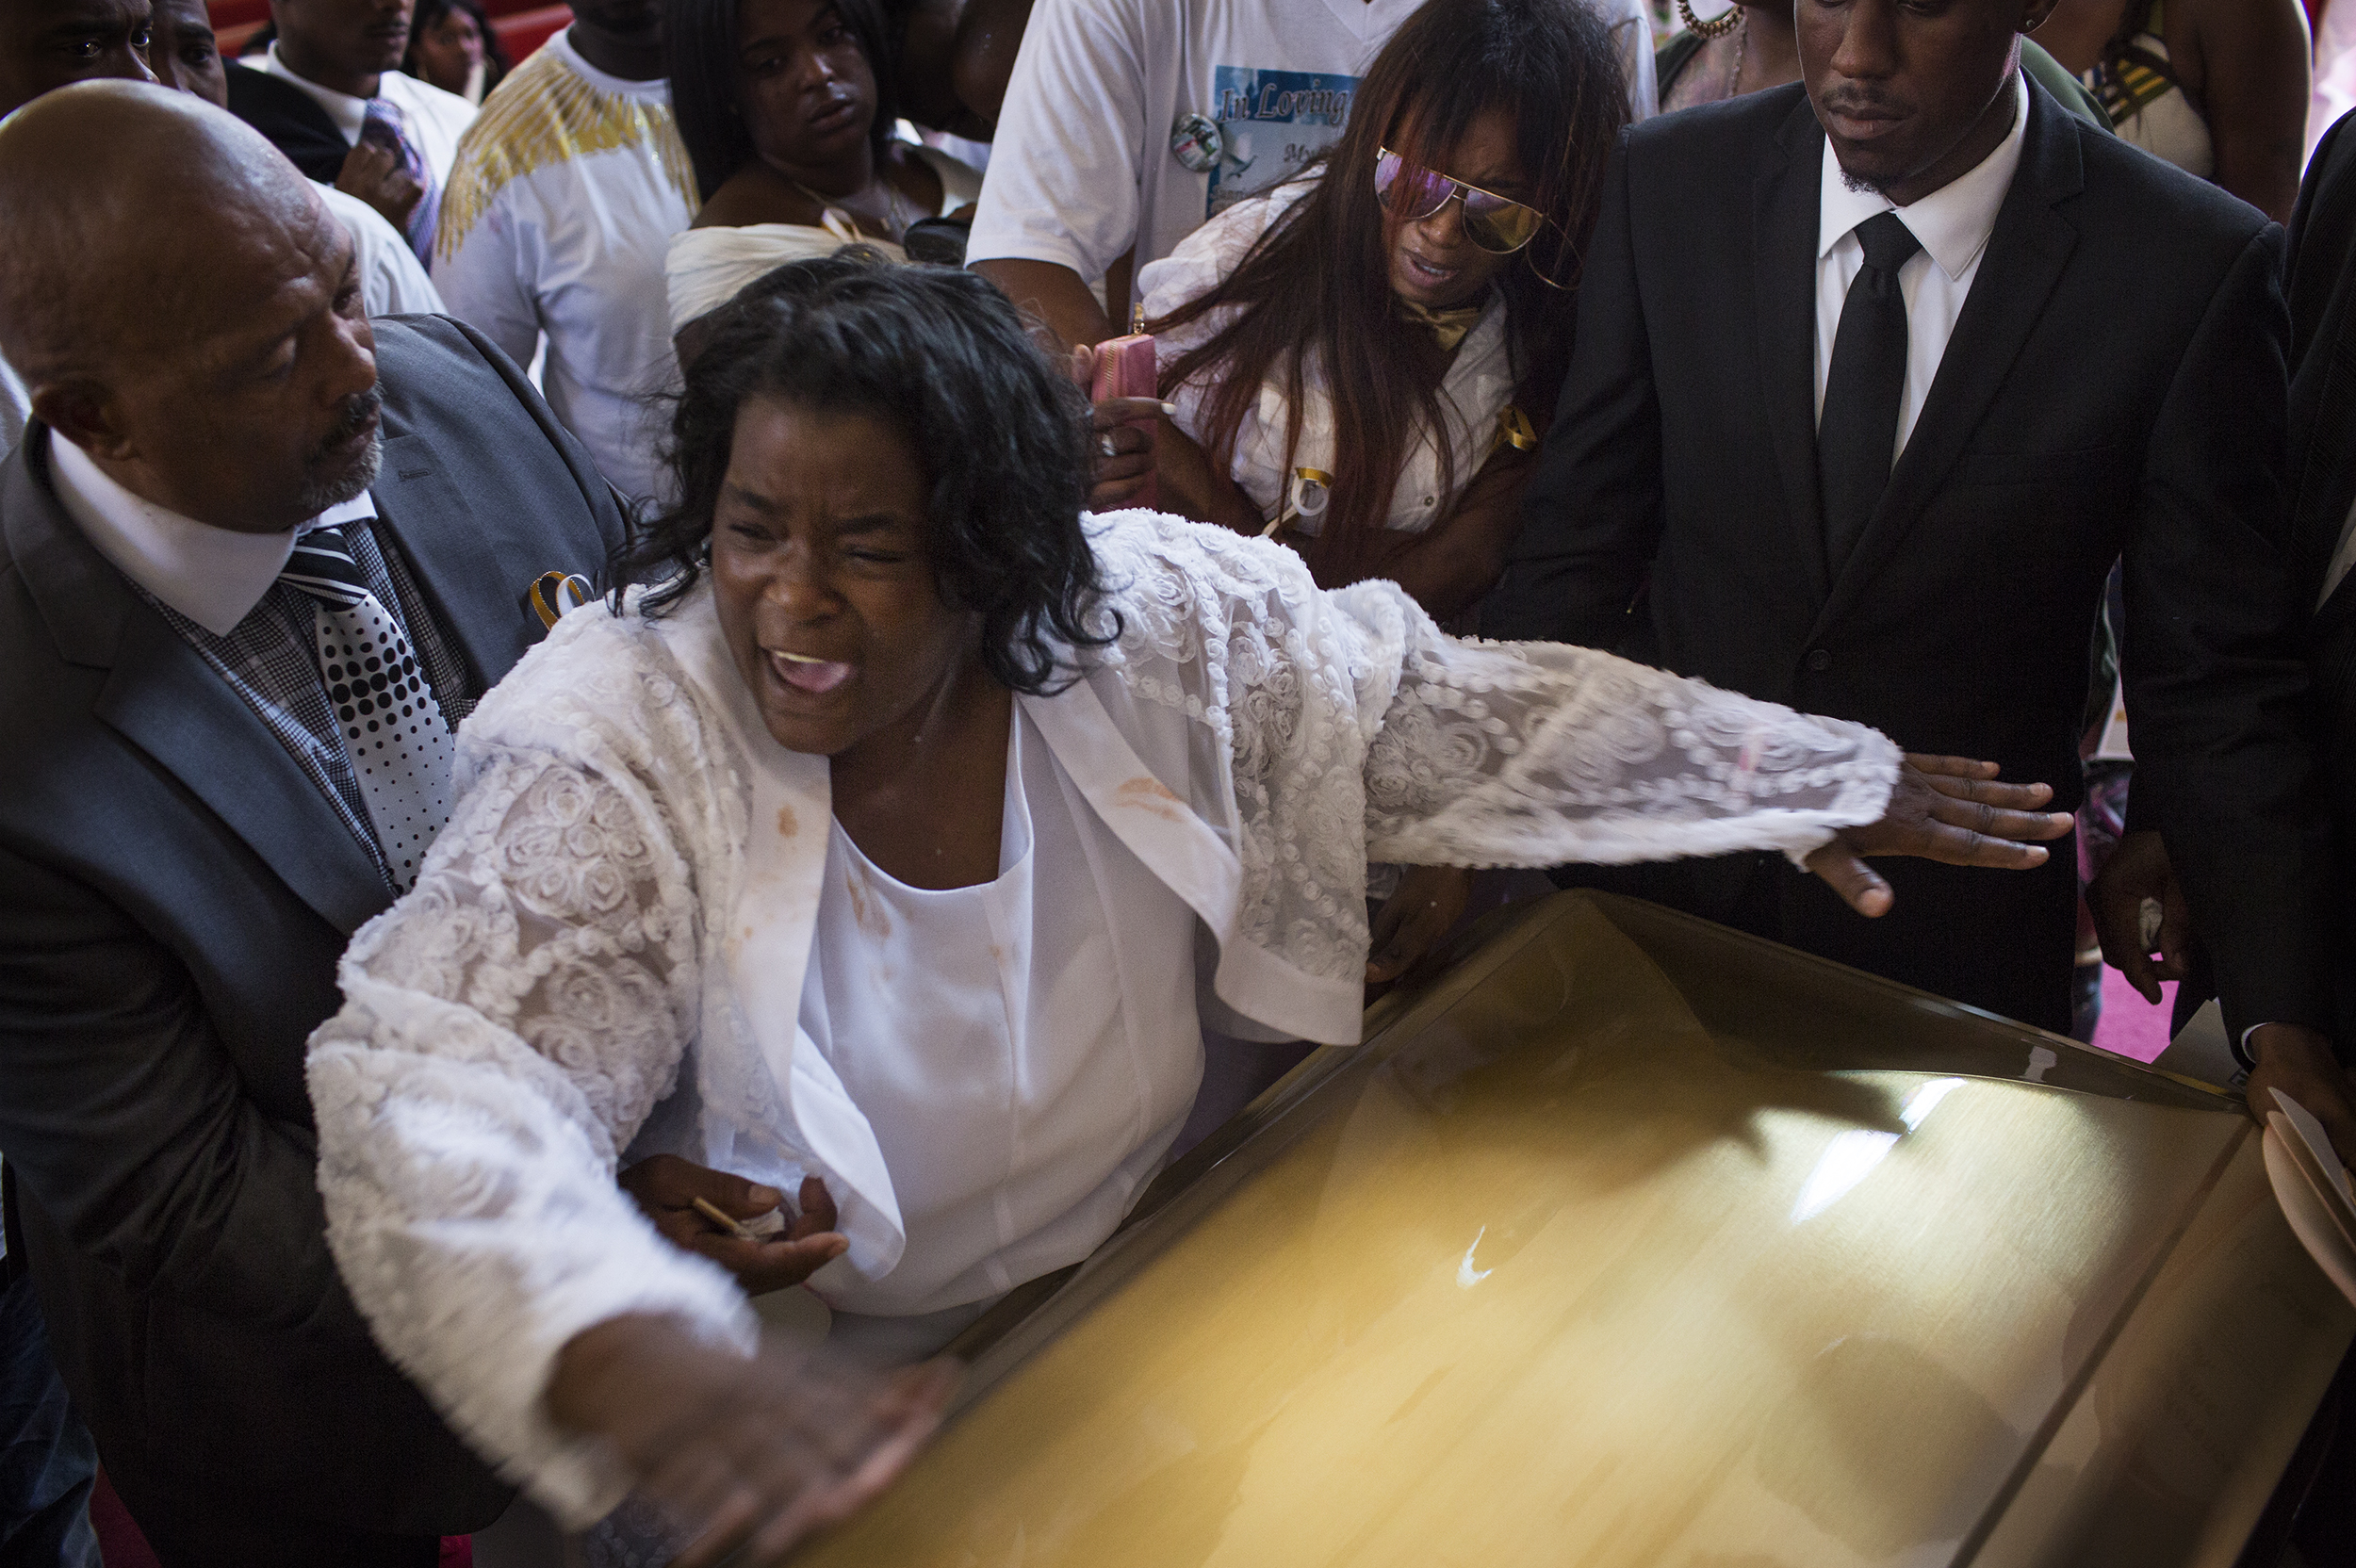  Barbara Pritchett-Hughes yells, "Its done. It's over," as she slams her son, DeAndre Hughes, casket shut at his funeral on Friday, July 29, 2016, after he was fatally shot a week earlier in Compton, CA. Barbara said her mind instantly flashed back t